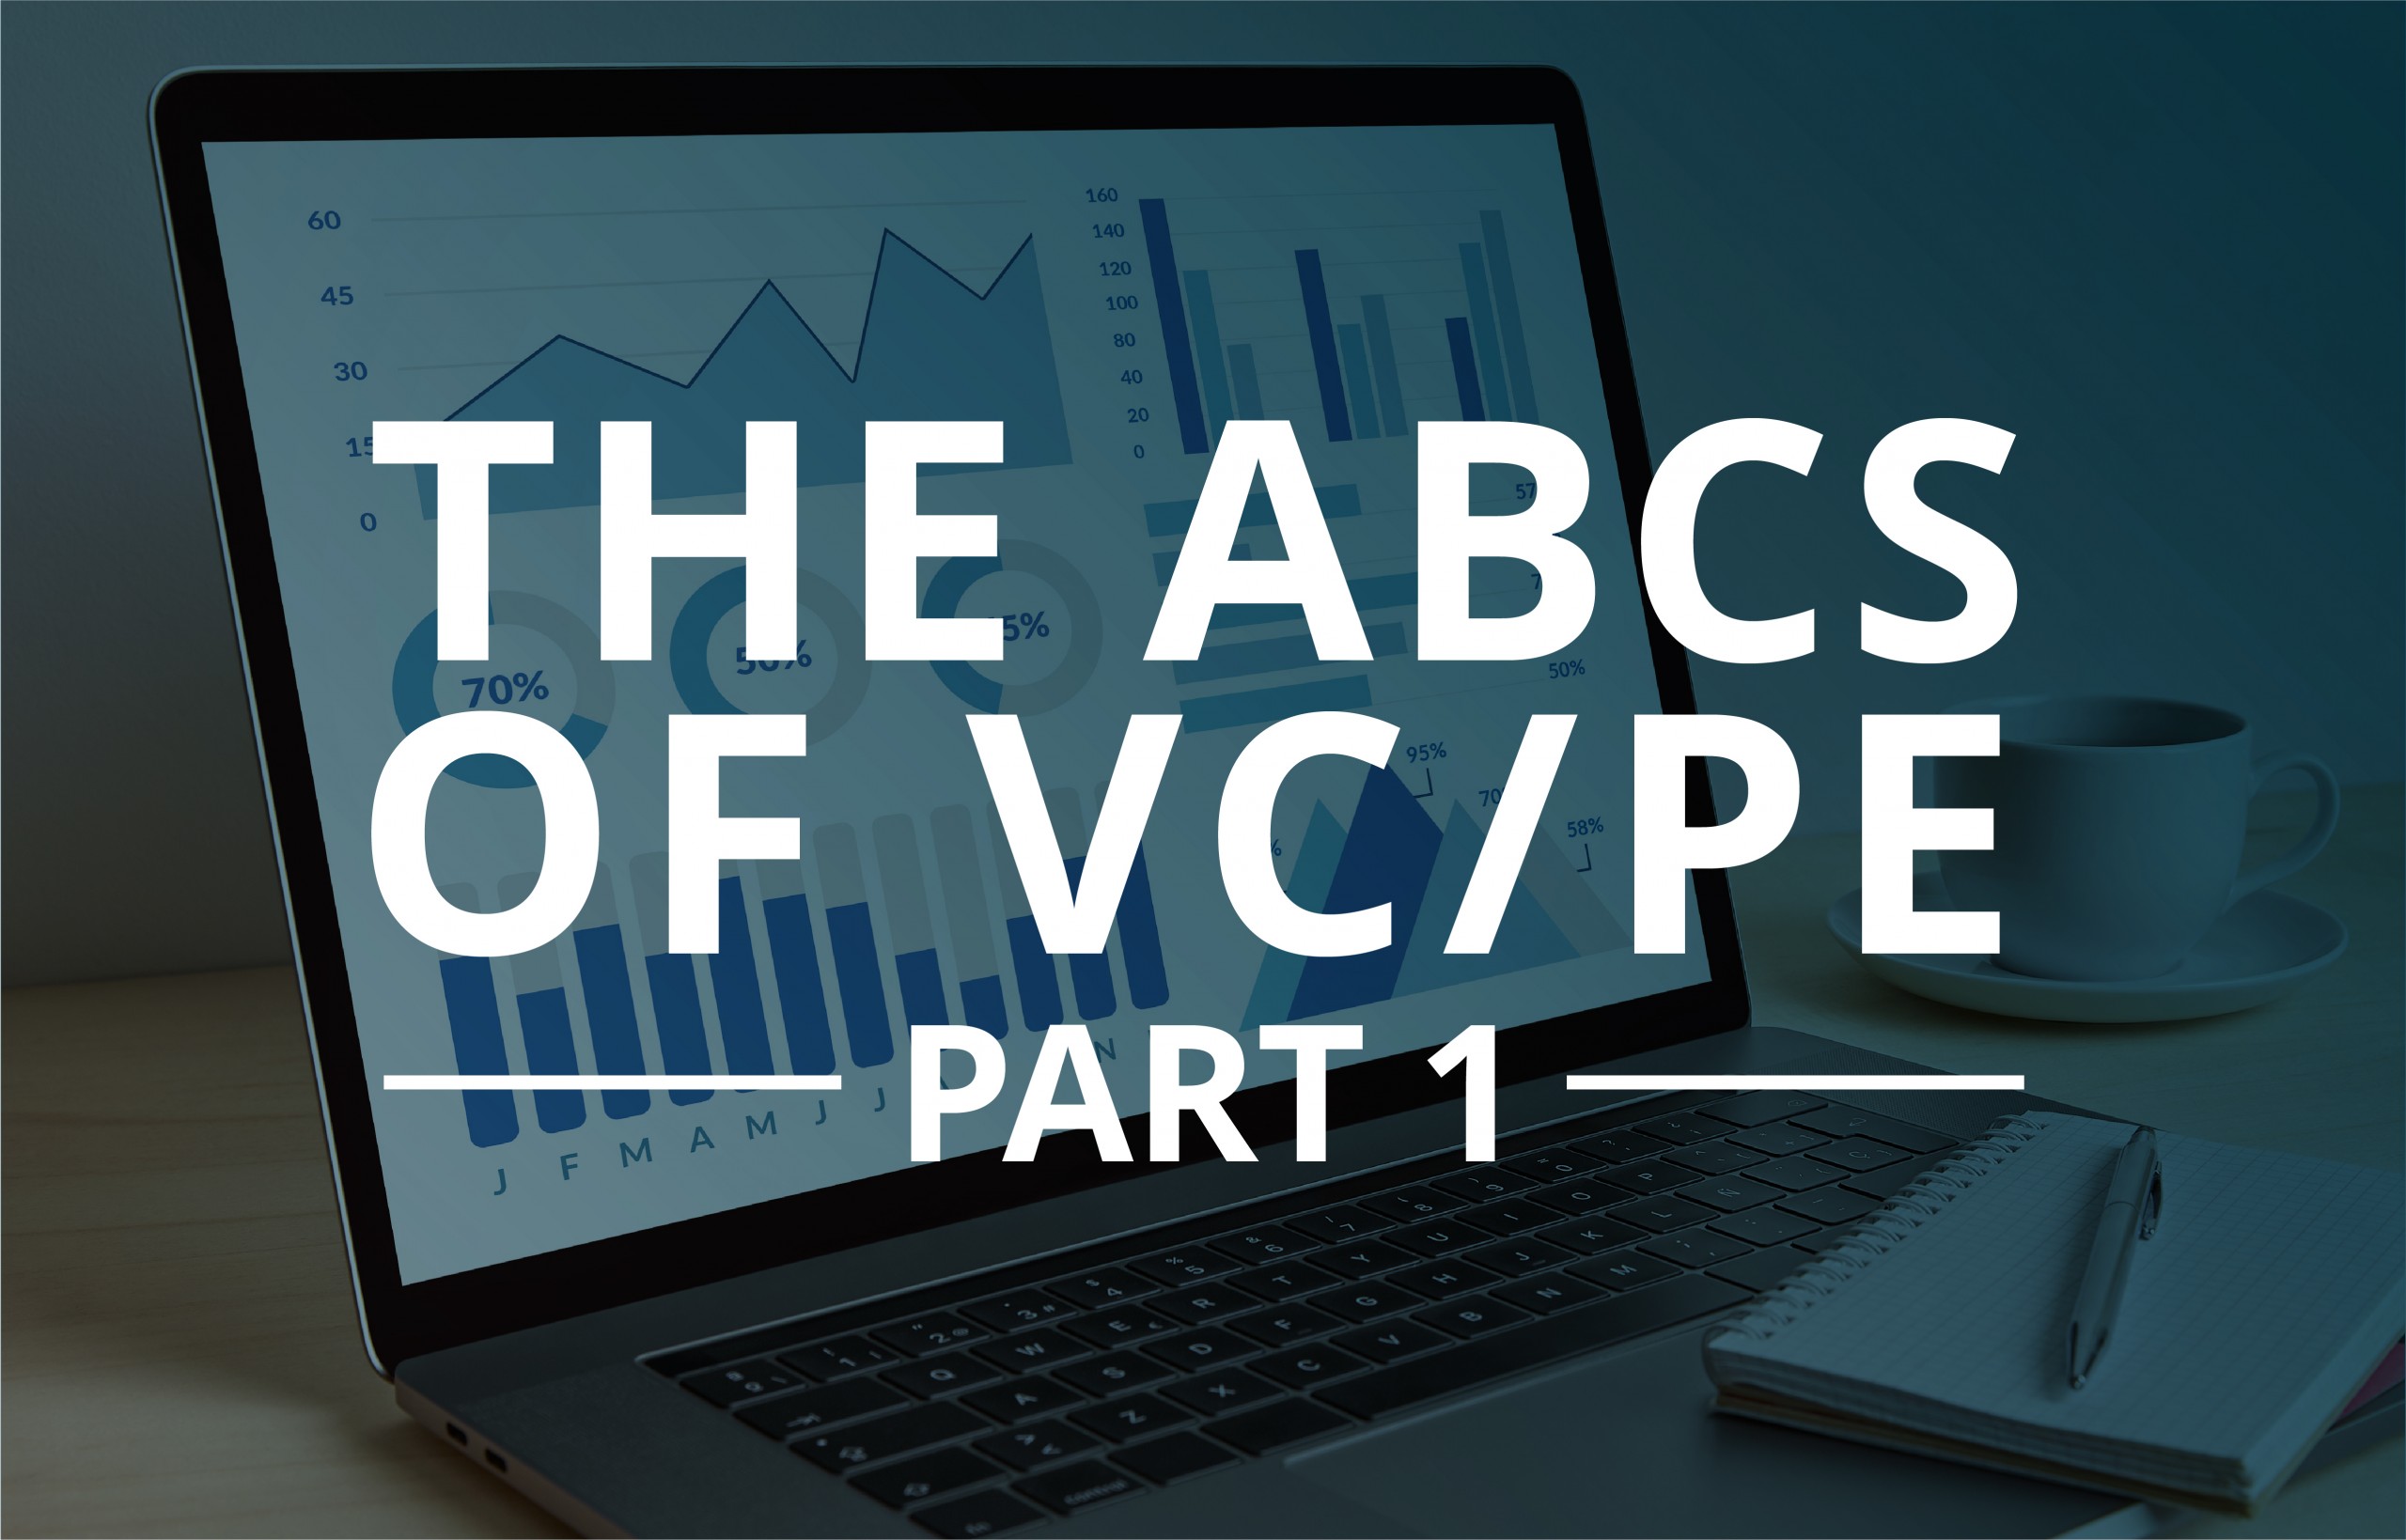 image for The ABCs of VC/PE, Part 1